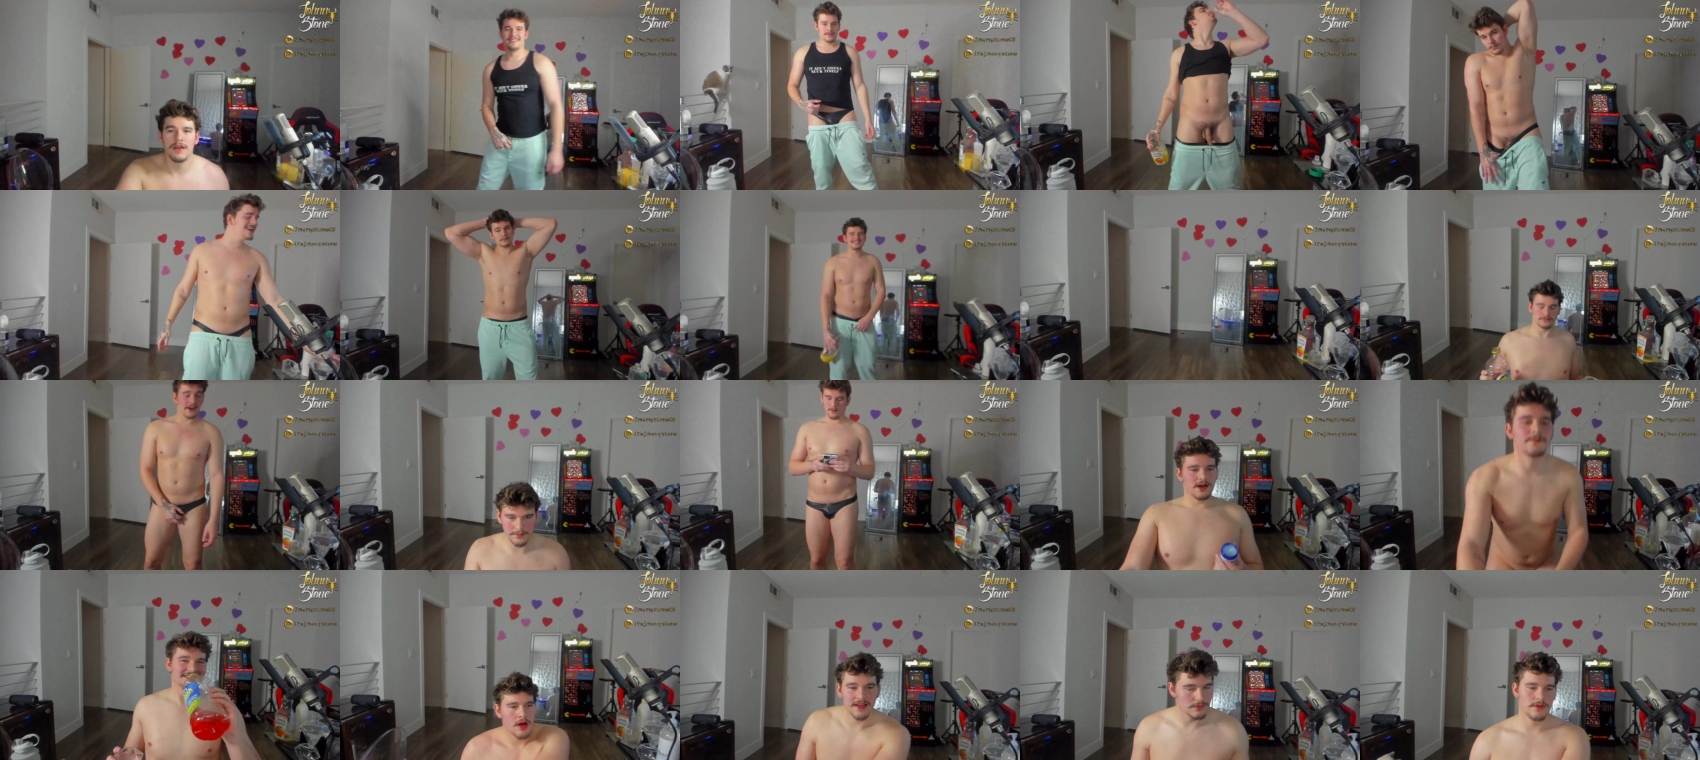 thejohnnystone  24-02-2022 video Topless